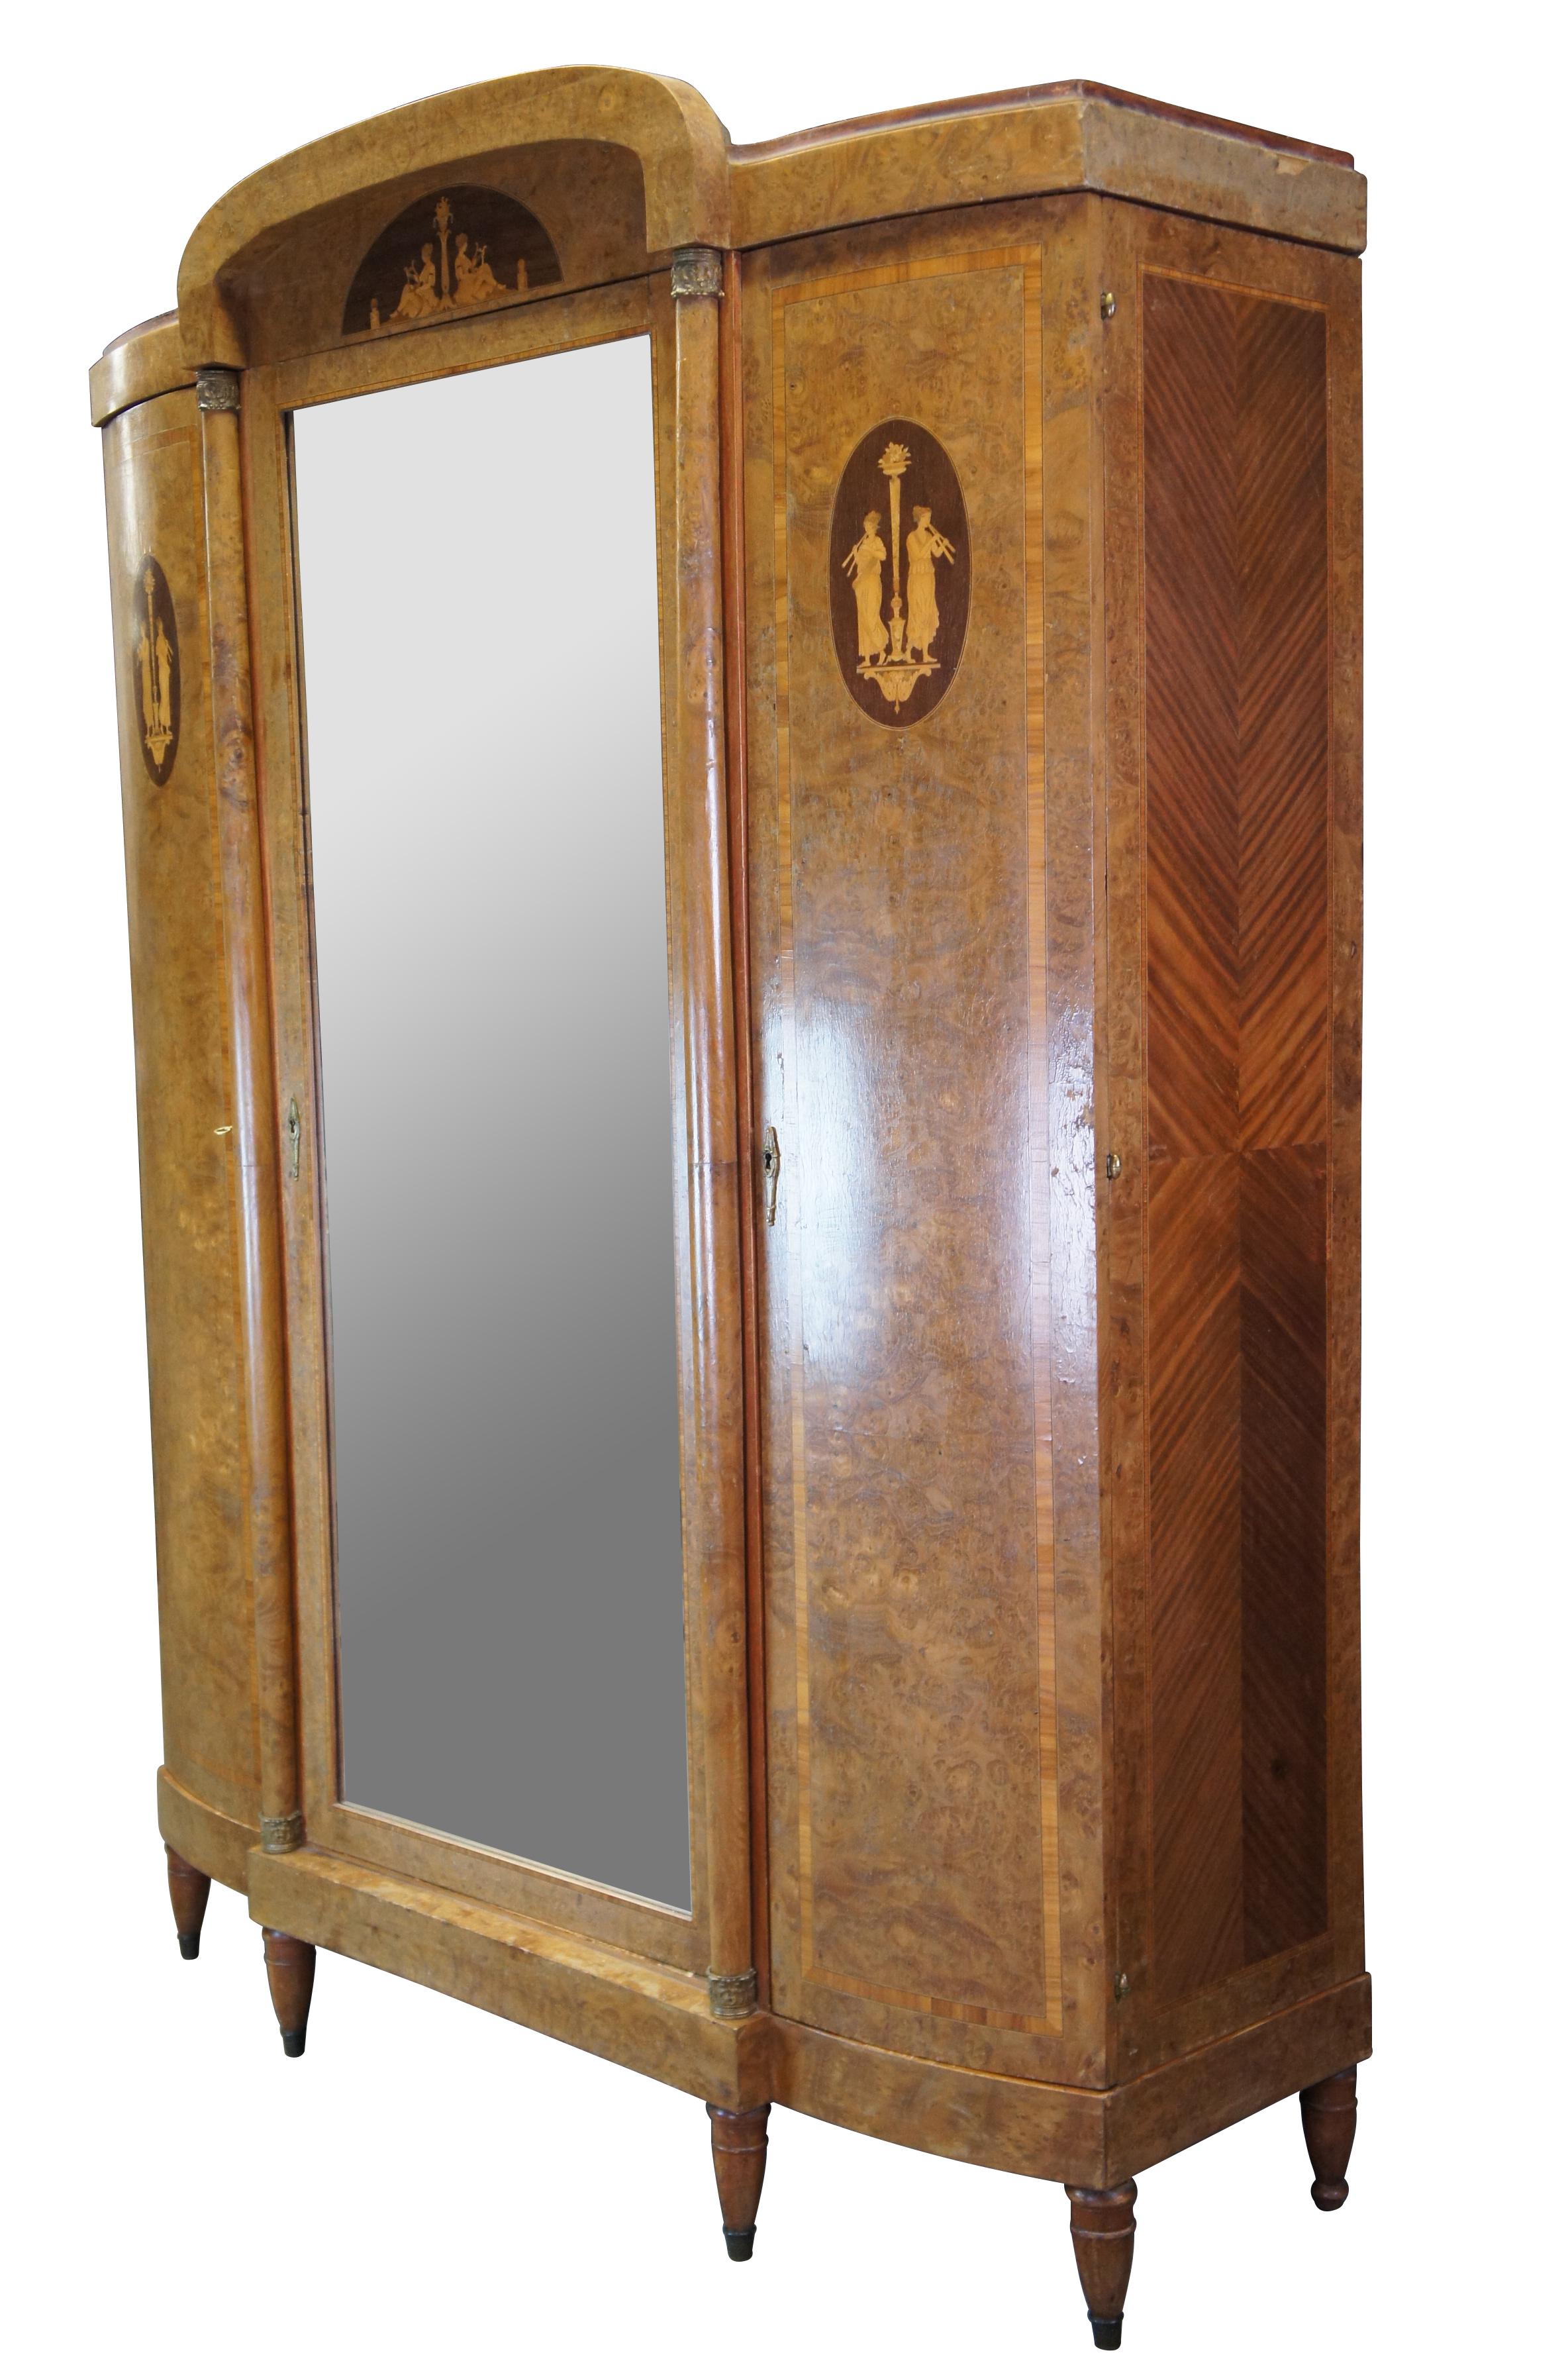 A beautiful Italian Neoclassical knockdown armoire or wardrobe from the last quarter of the 19th century. Rectangular in form with bowfront and domed top, accompanied by graceful brass capped columns along the front. Made from walnut and olive ash